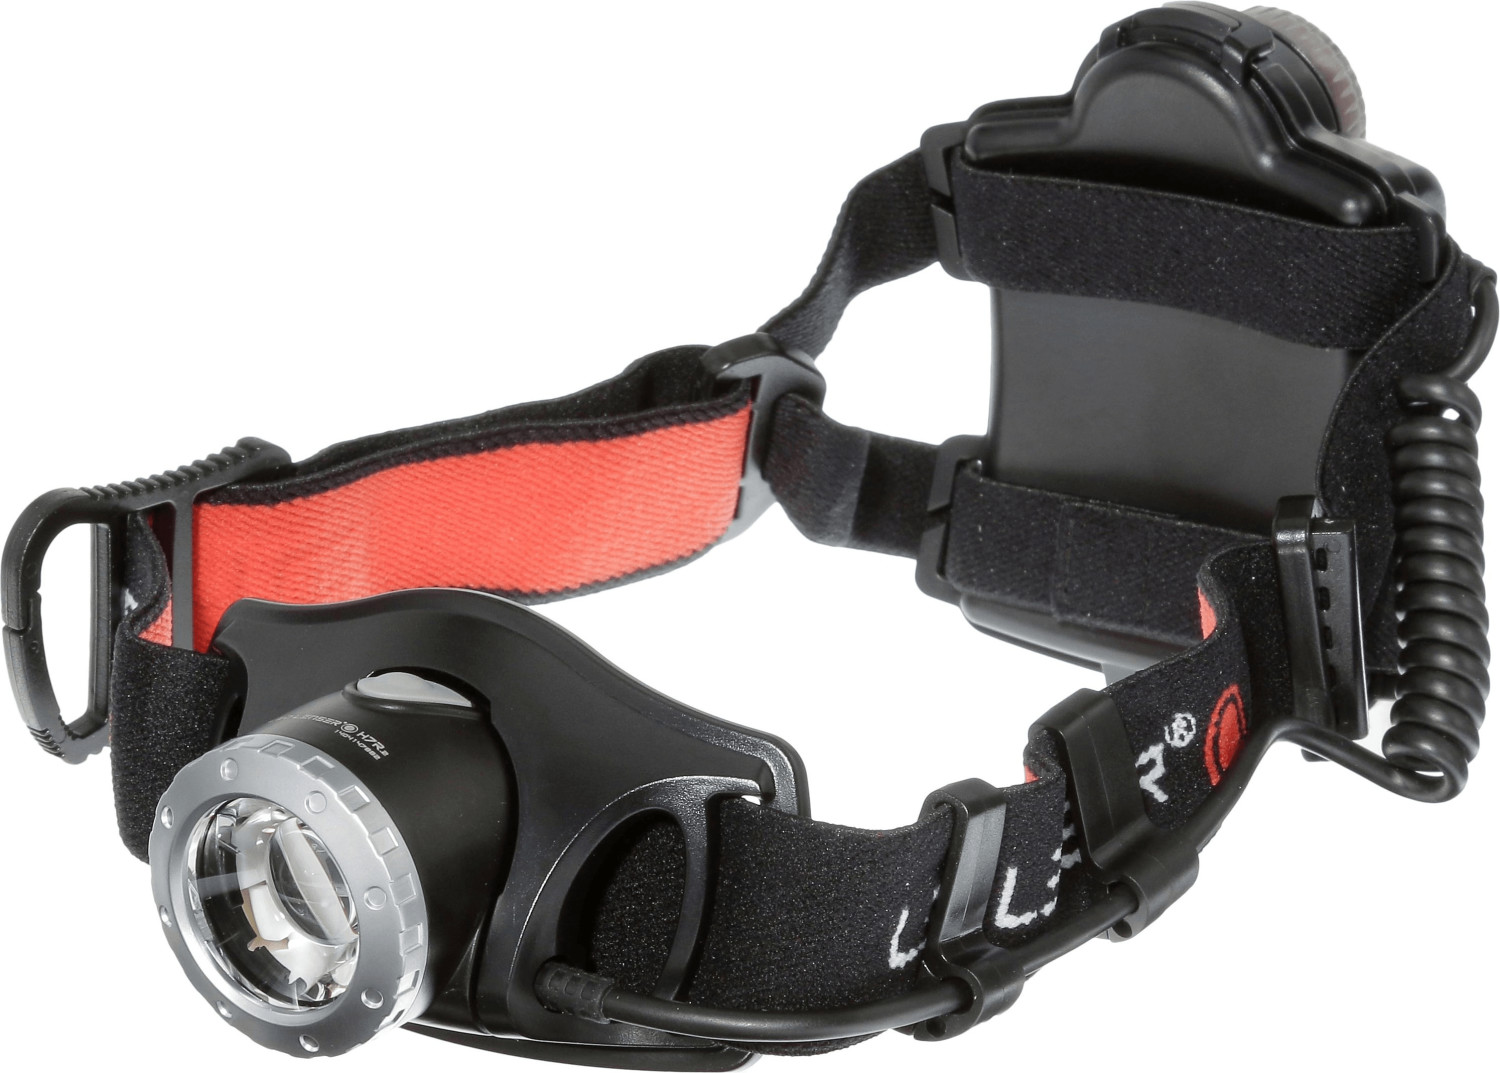 Lampe Frontale Rechargeable H8r Led Lenser - 600 Lumens : infos